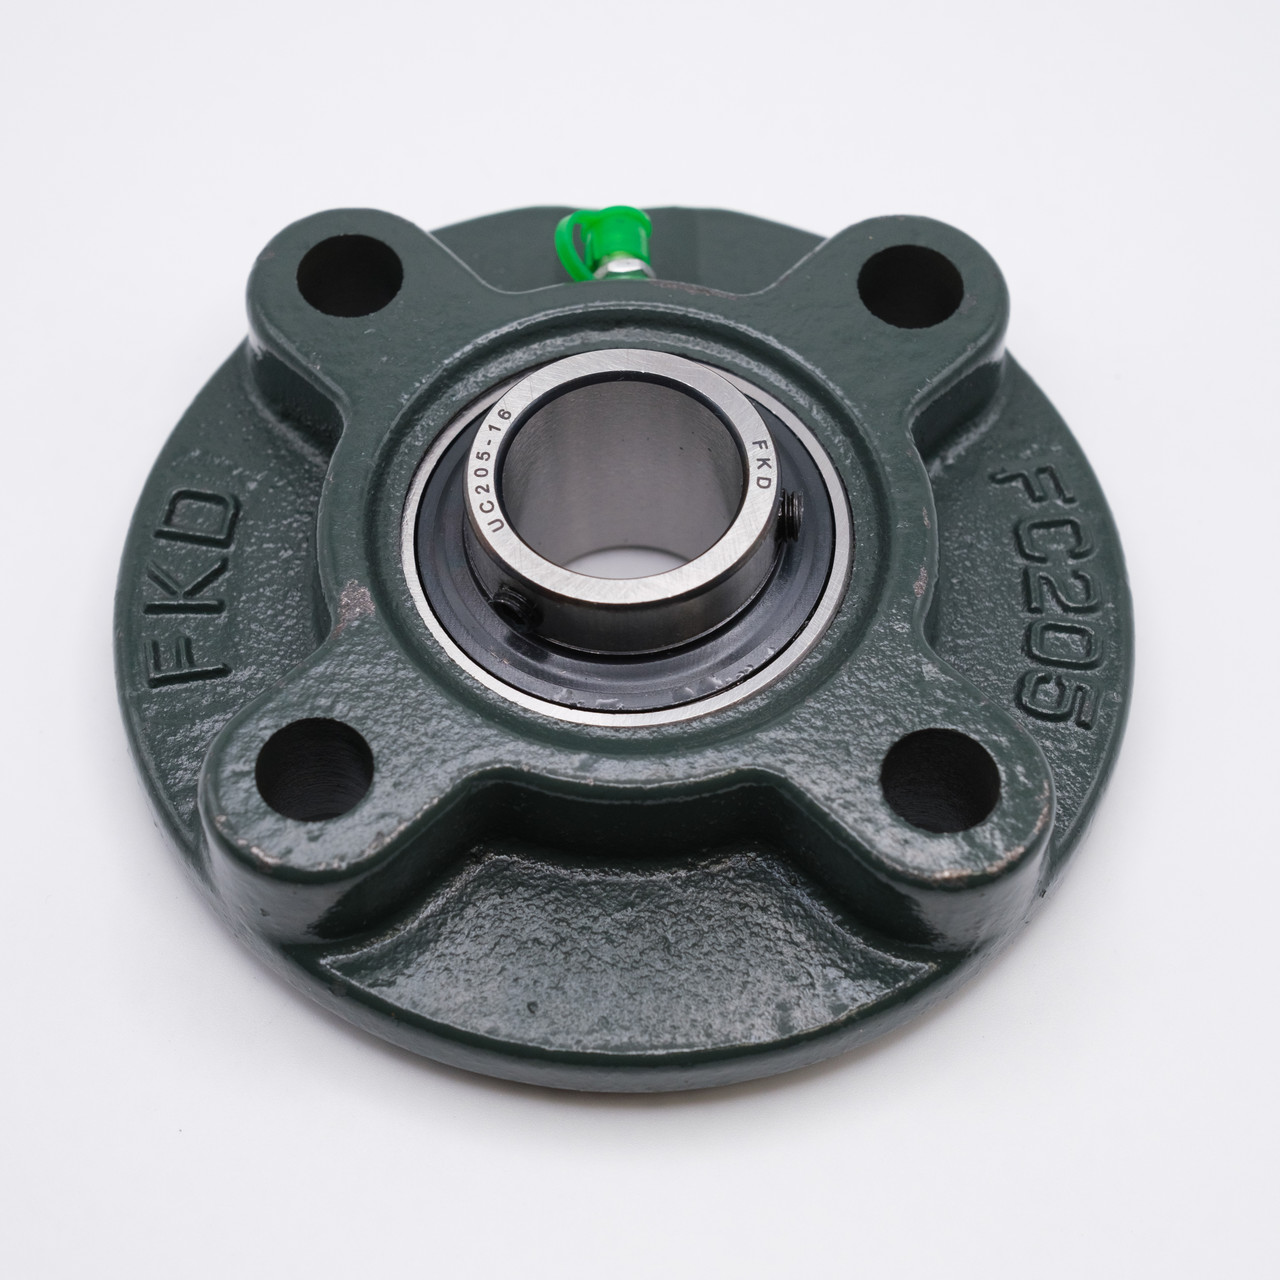 UCFC201 Round Flange Housing 4 Bolt Ball Bearing 12mm Bore Top View